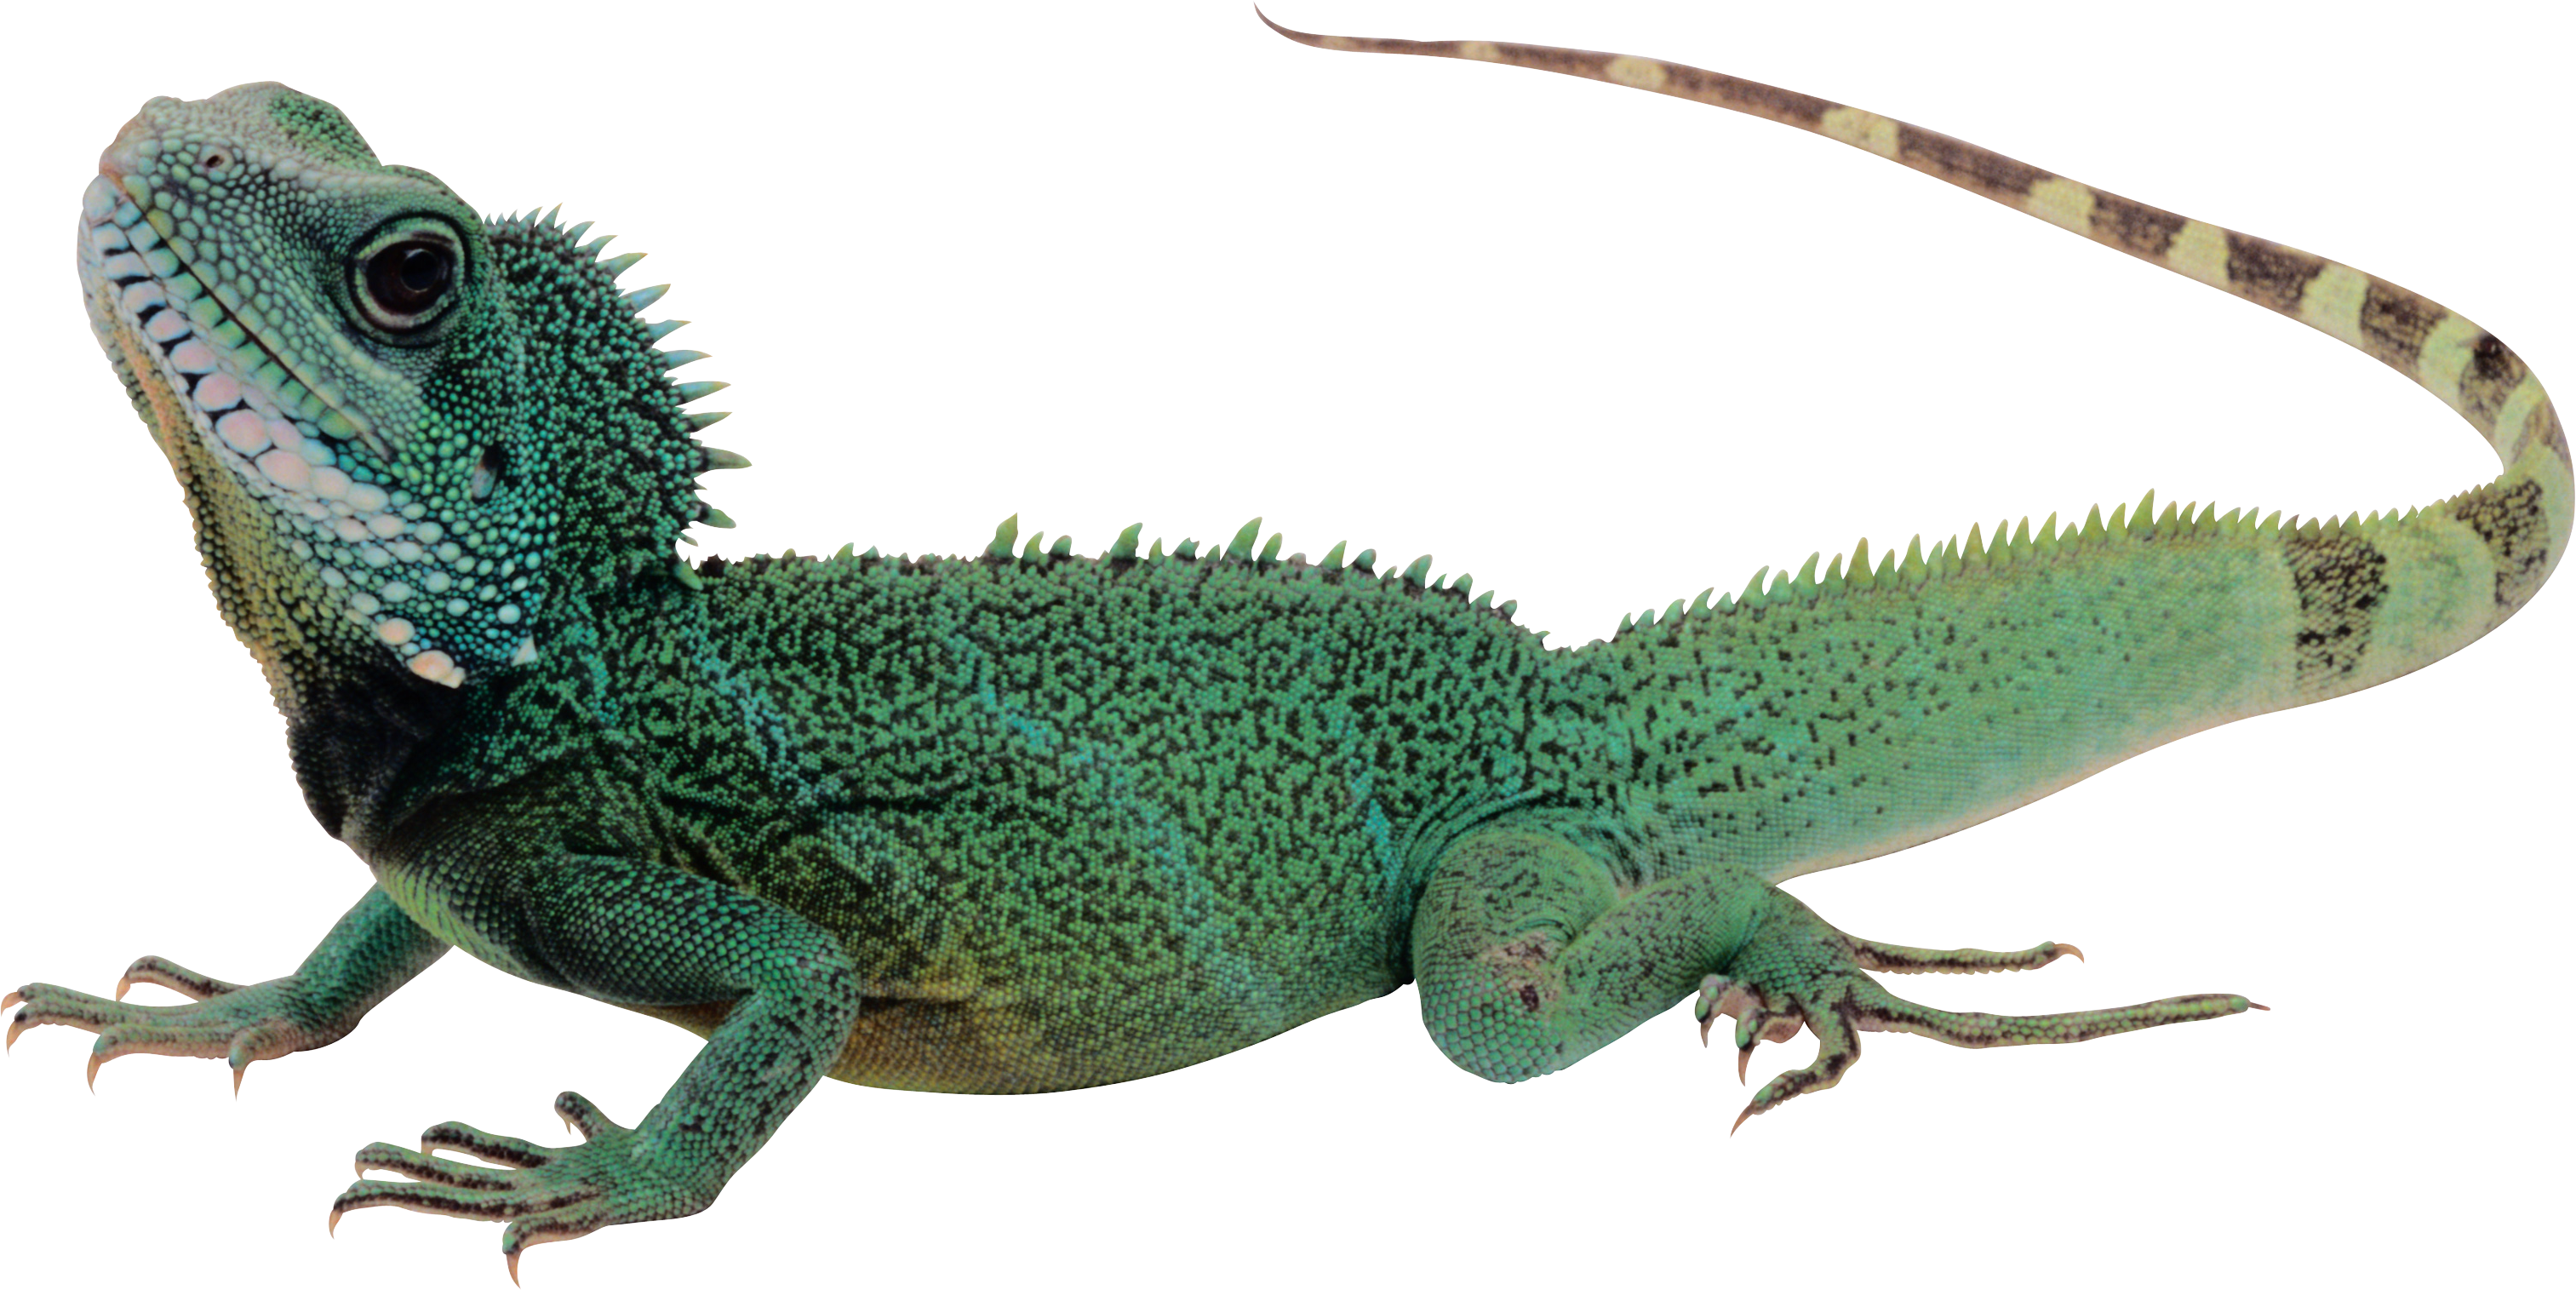 Lizard PNG images free download.